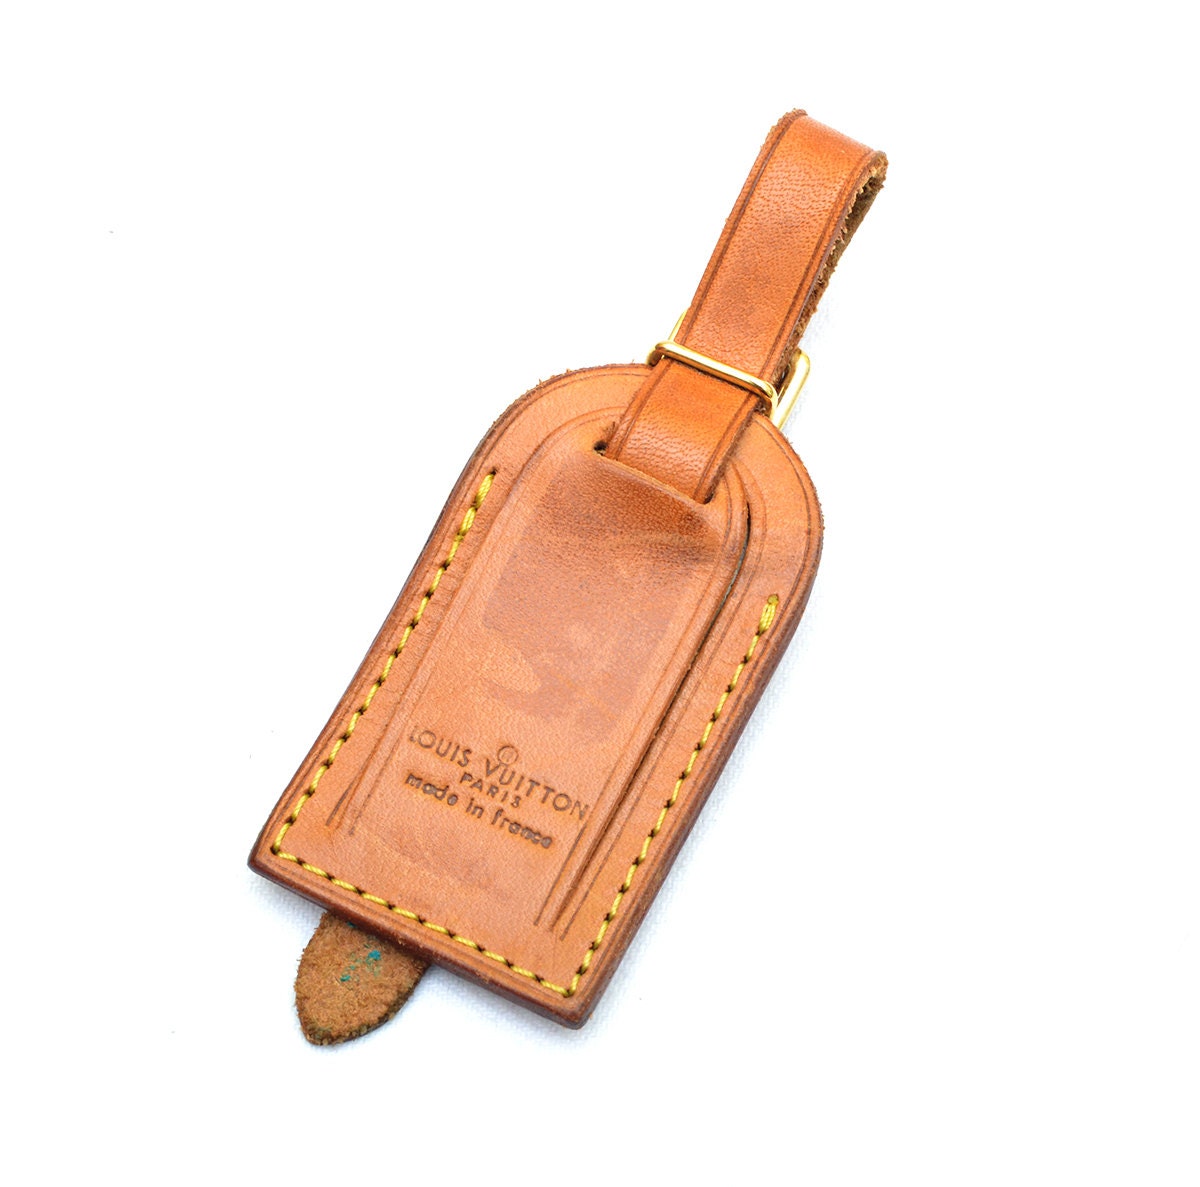 Authentic Louis Vuitton Luggage Bag Leather ID Tag Holder